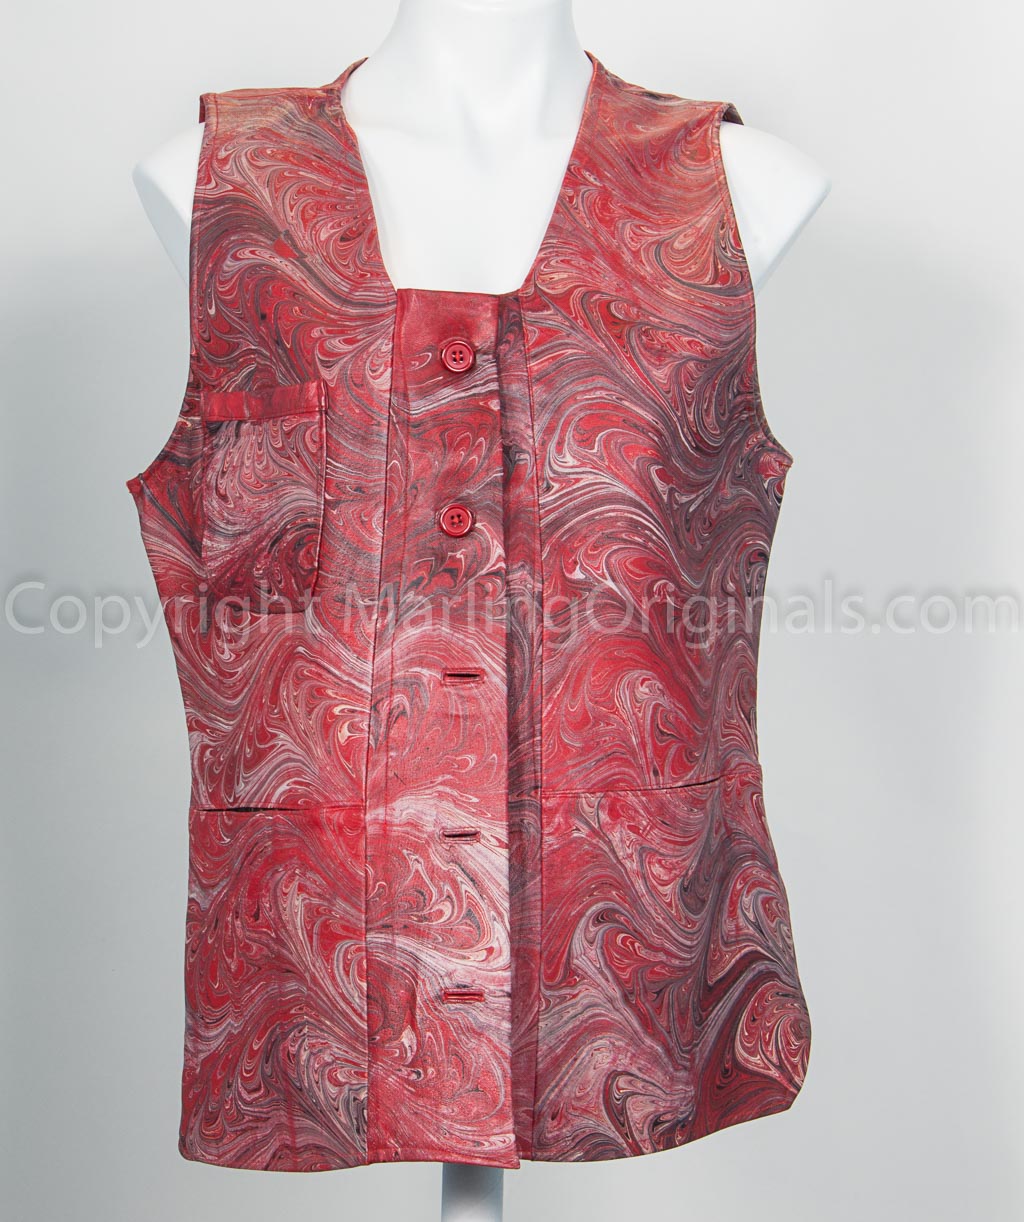 marbled leather vest in red and black with white